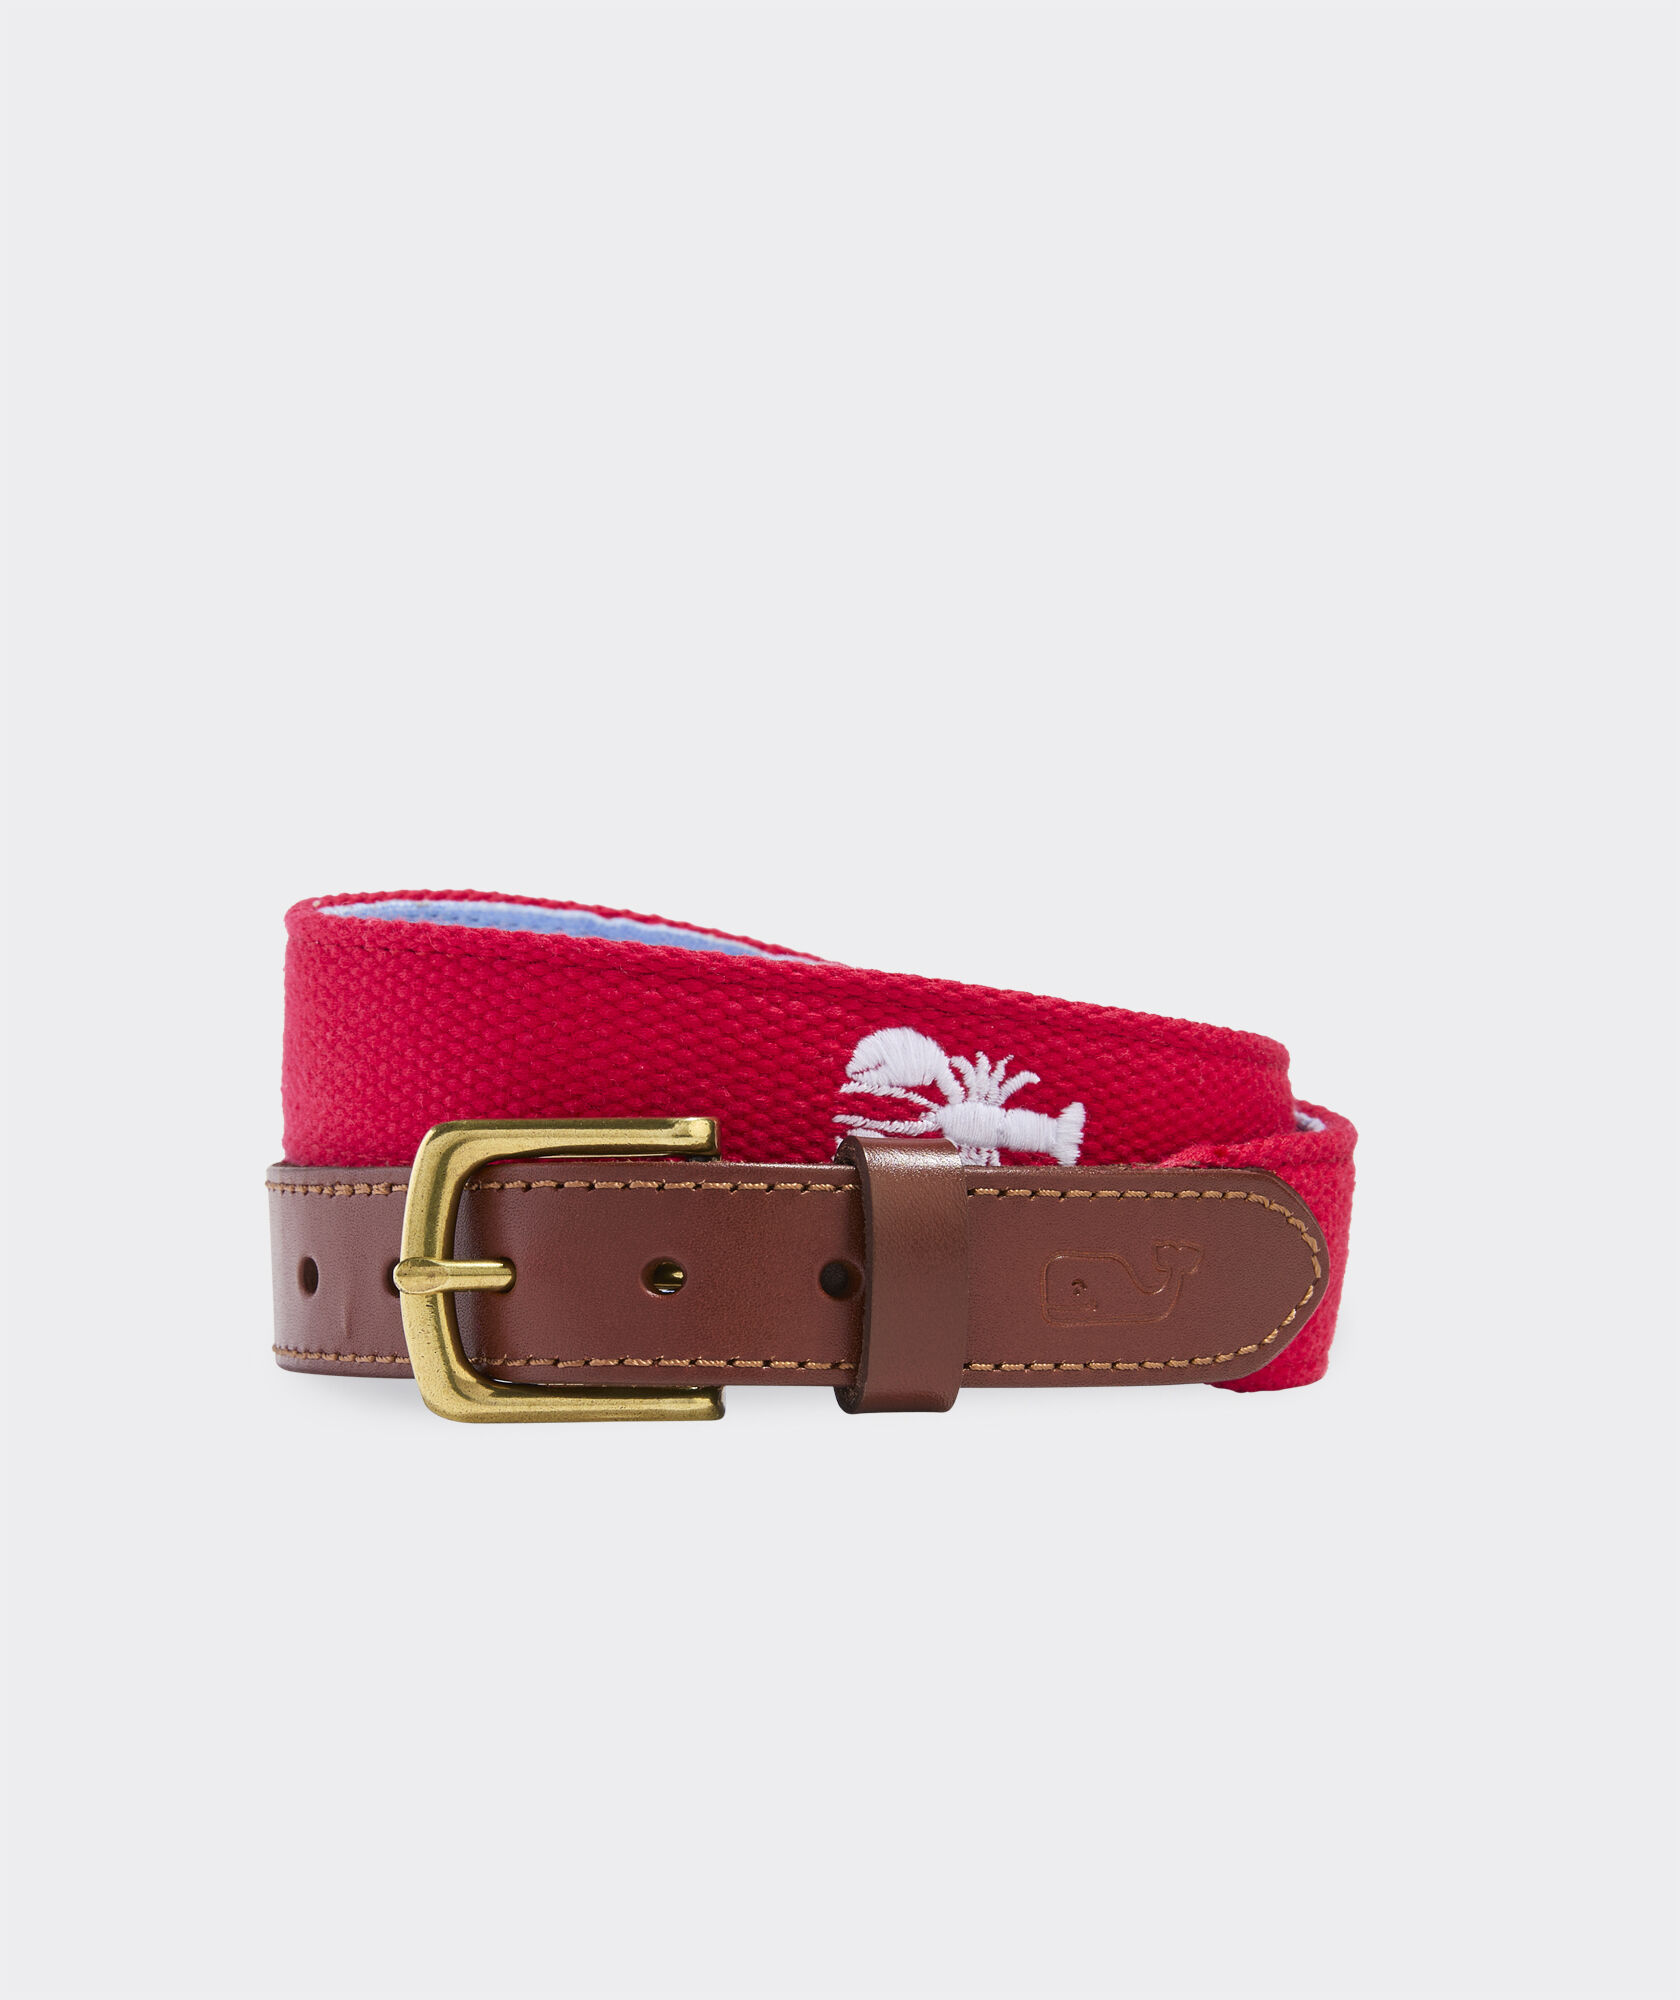 Boys' Lobster Embroidered Canvas Club Belt